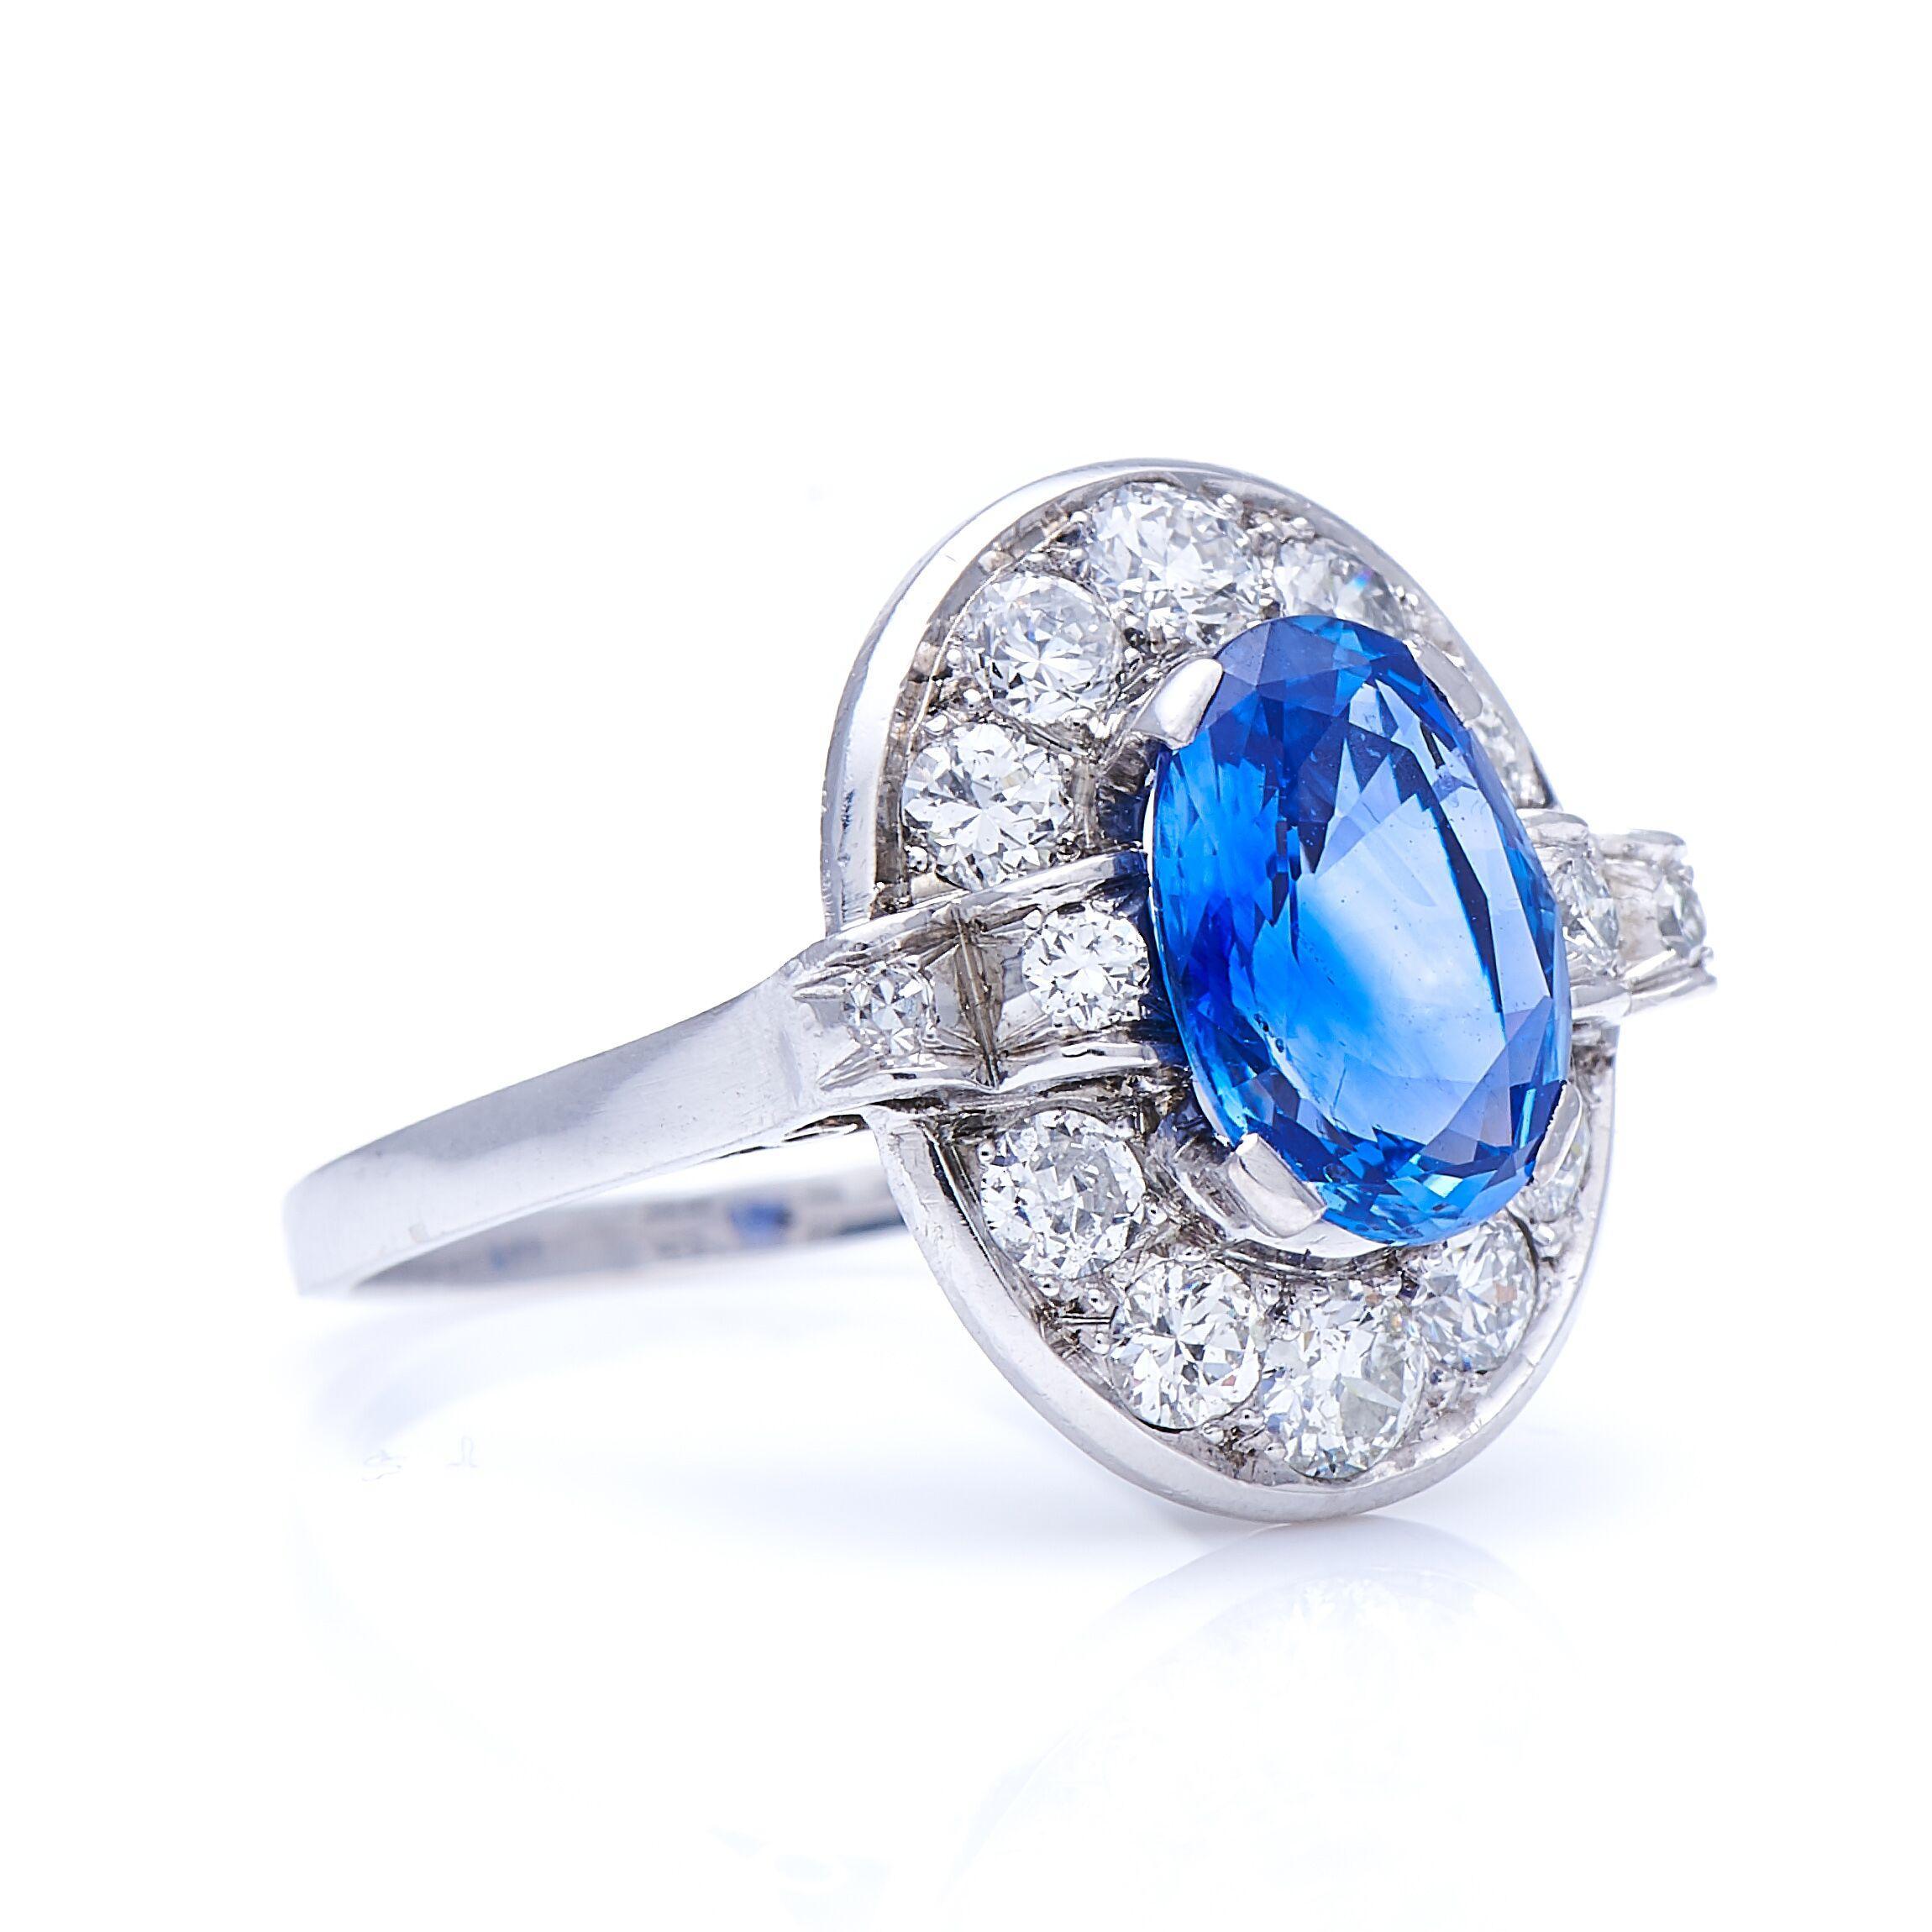 Sapphire and diamond ring, 1920s. This ring centres on a gorgeous oval sapphire weighing 2.64 carats, of a mid violet-blue known as ‘Cornflower’, strongly associated with sapphires from Sri Lanka (Ceylon). In addition to its characteristic colour,